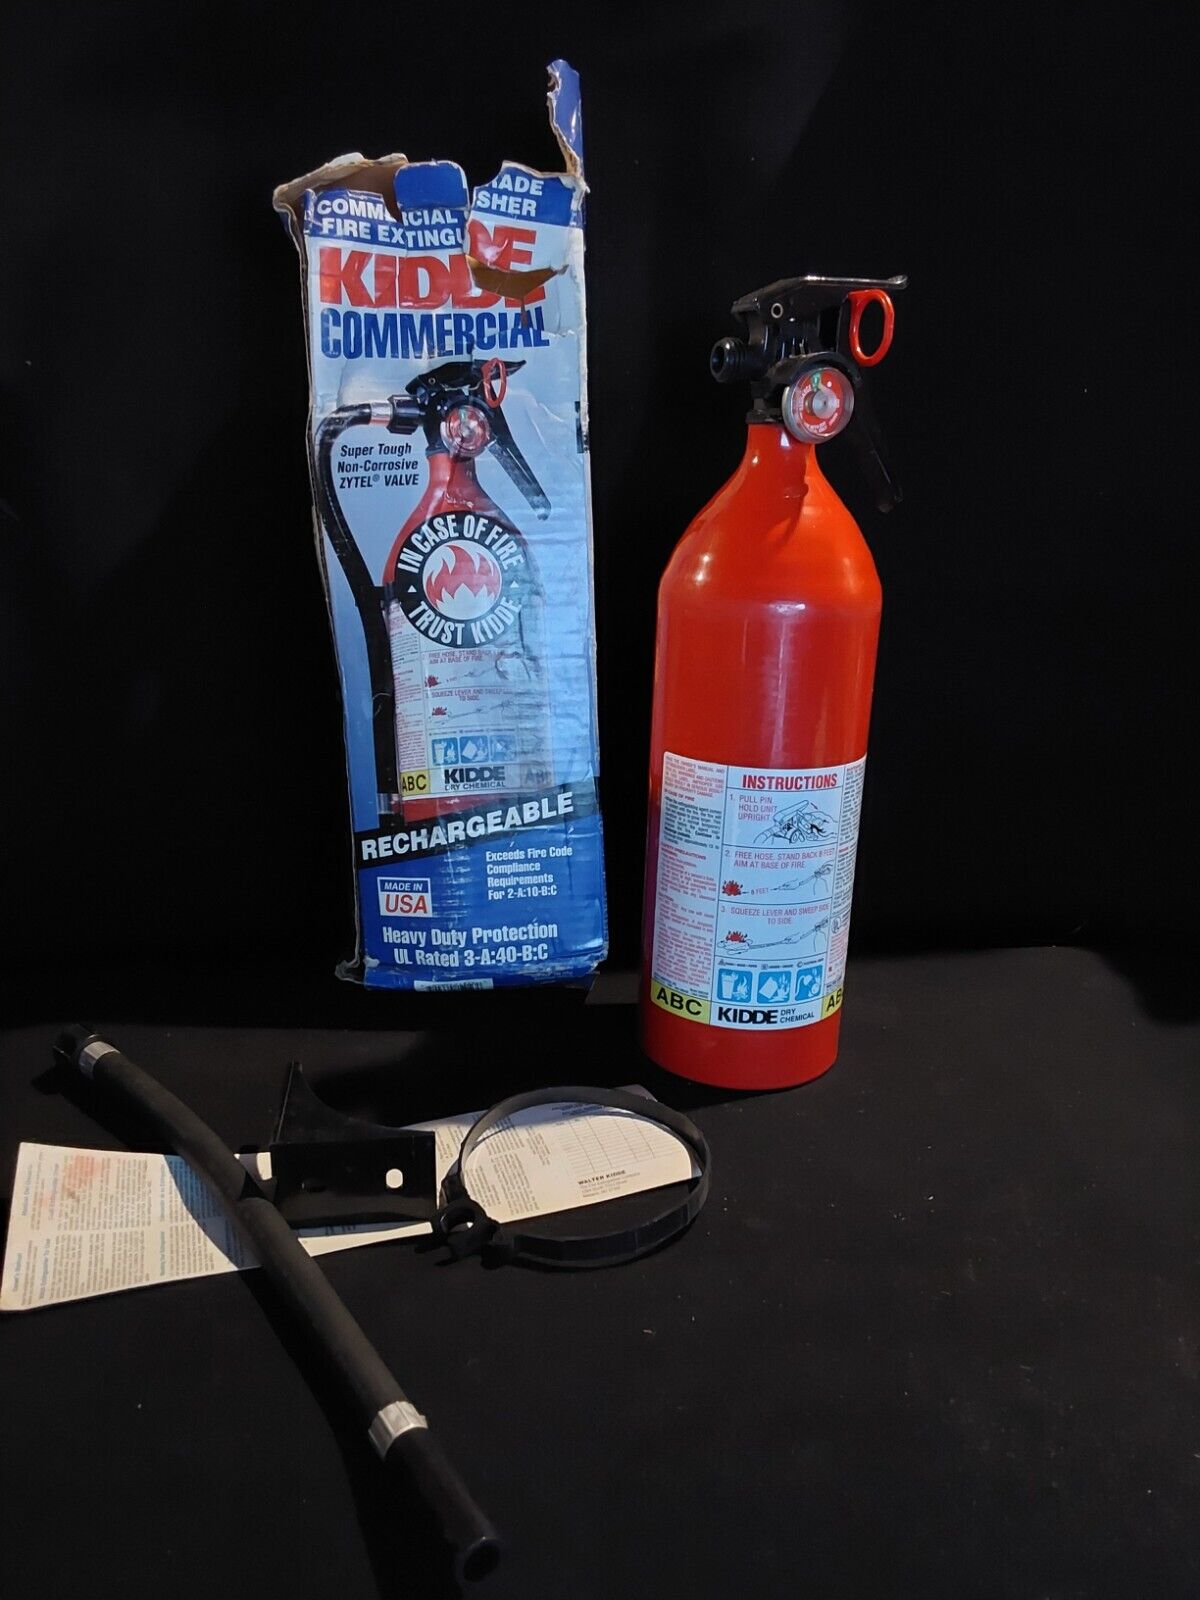 KIDDE Commercial Fire Extinguisher Rechargeable 5 LBS RATED 3-A:40-B:C